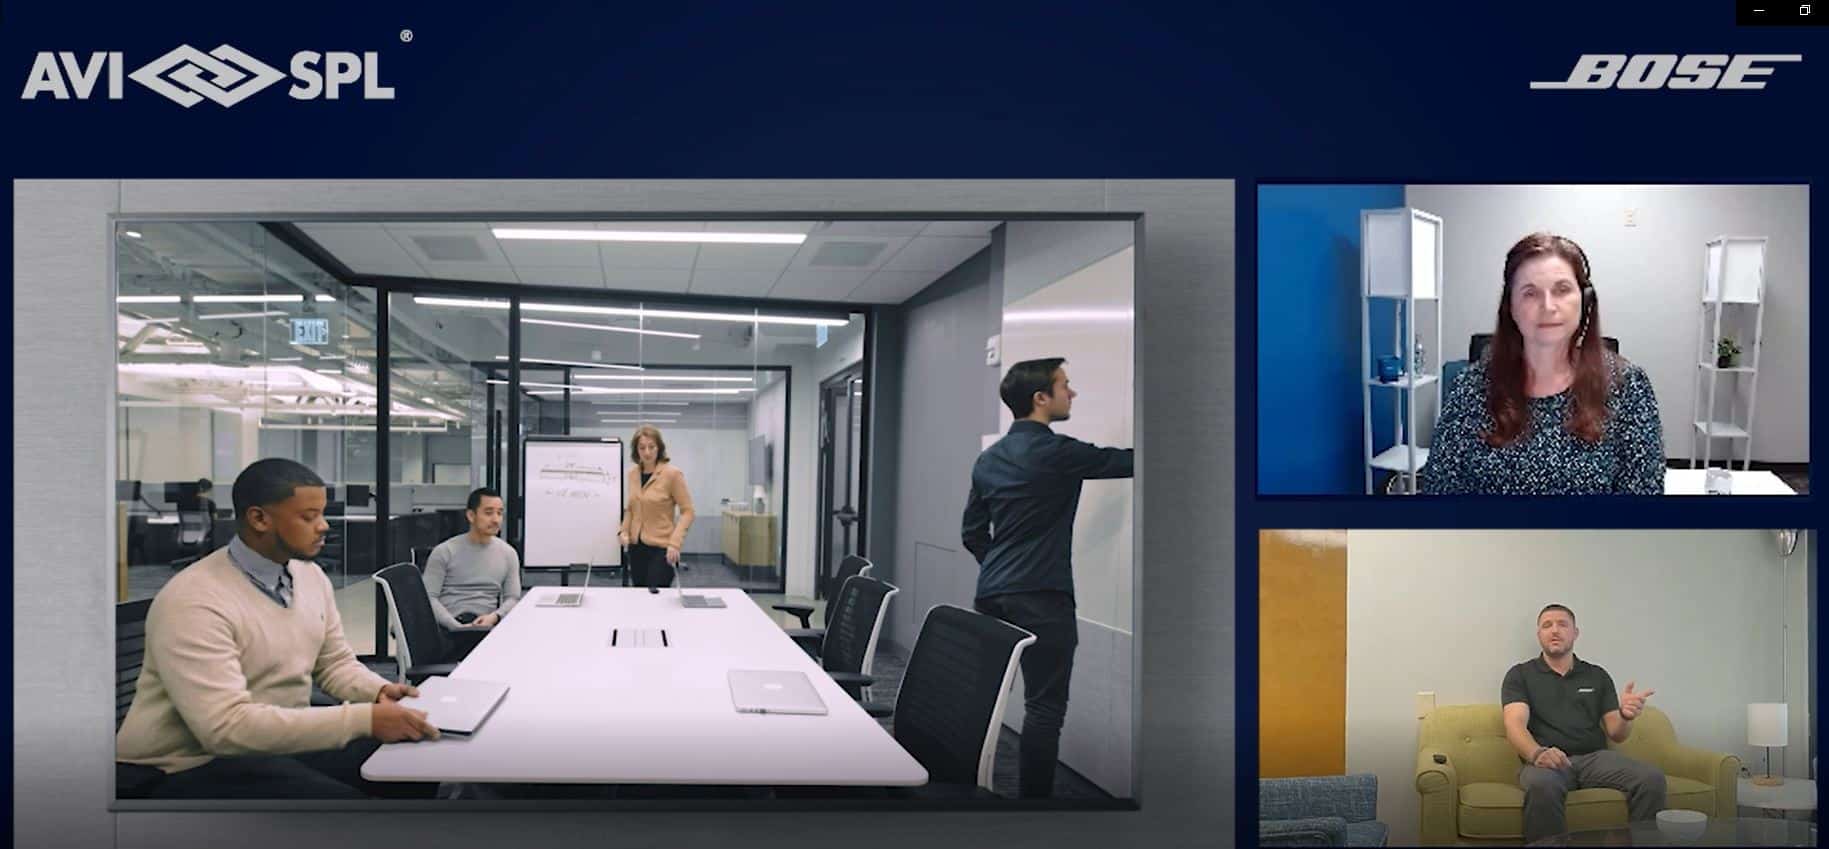 Bose deliver meeting equity podcast screenshot with conference room and hosts